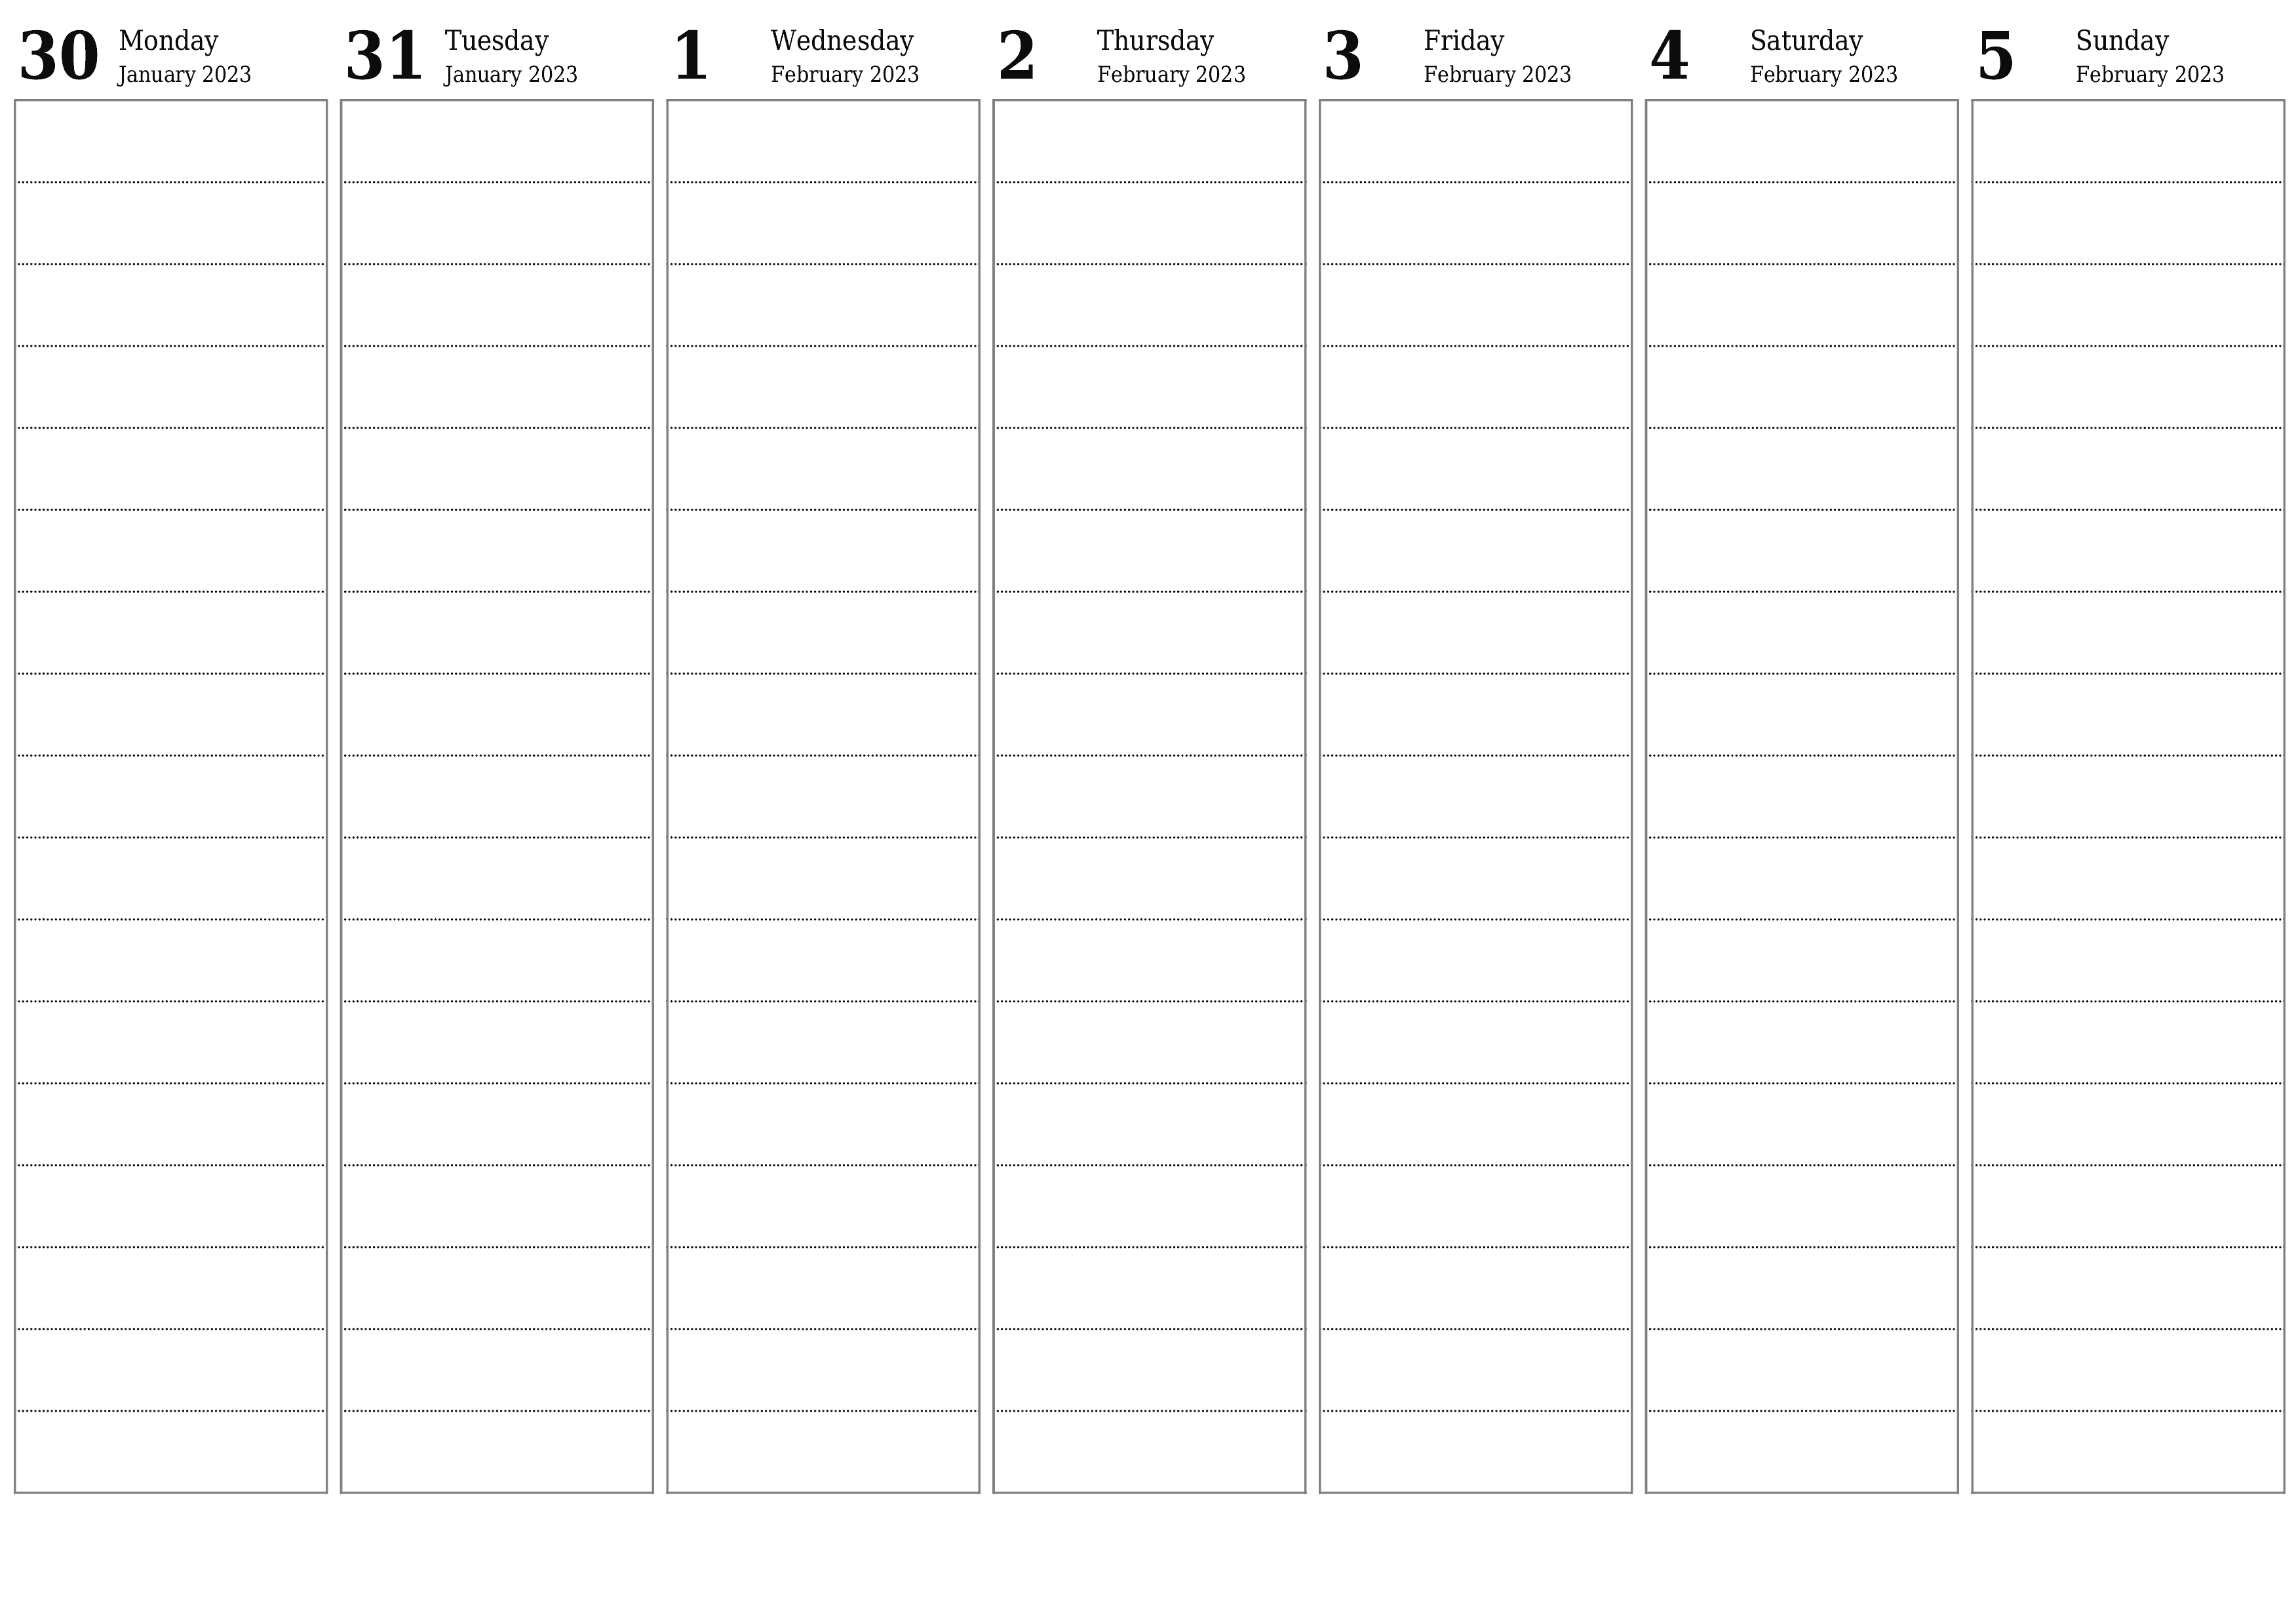 Blank weekly printable calendar and planner for week February 2023 with notes, save and print to PDF PNG English